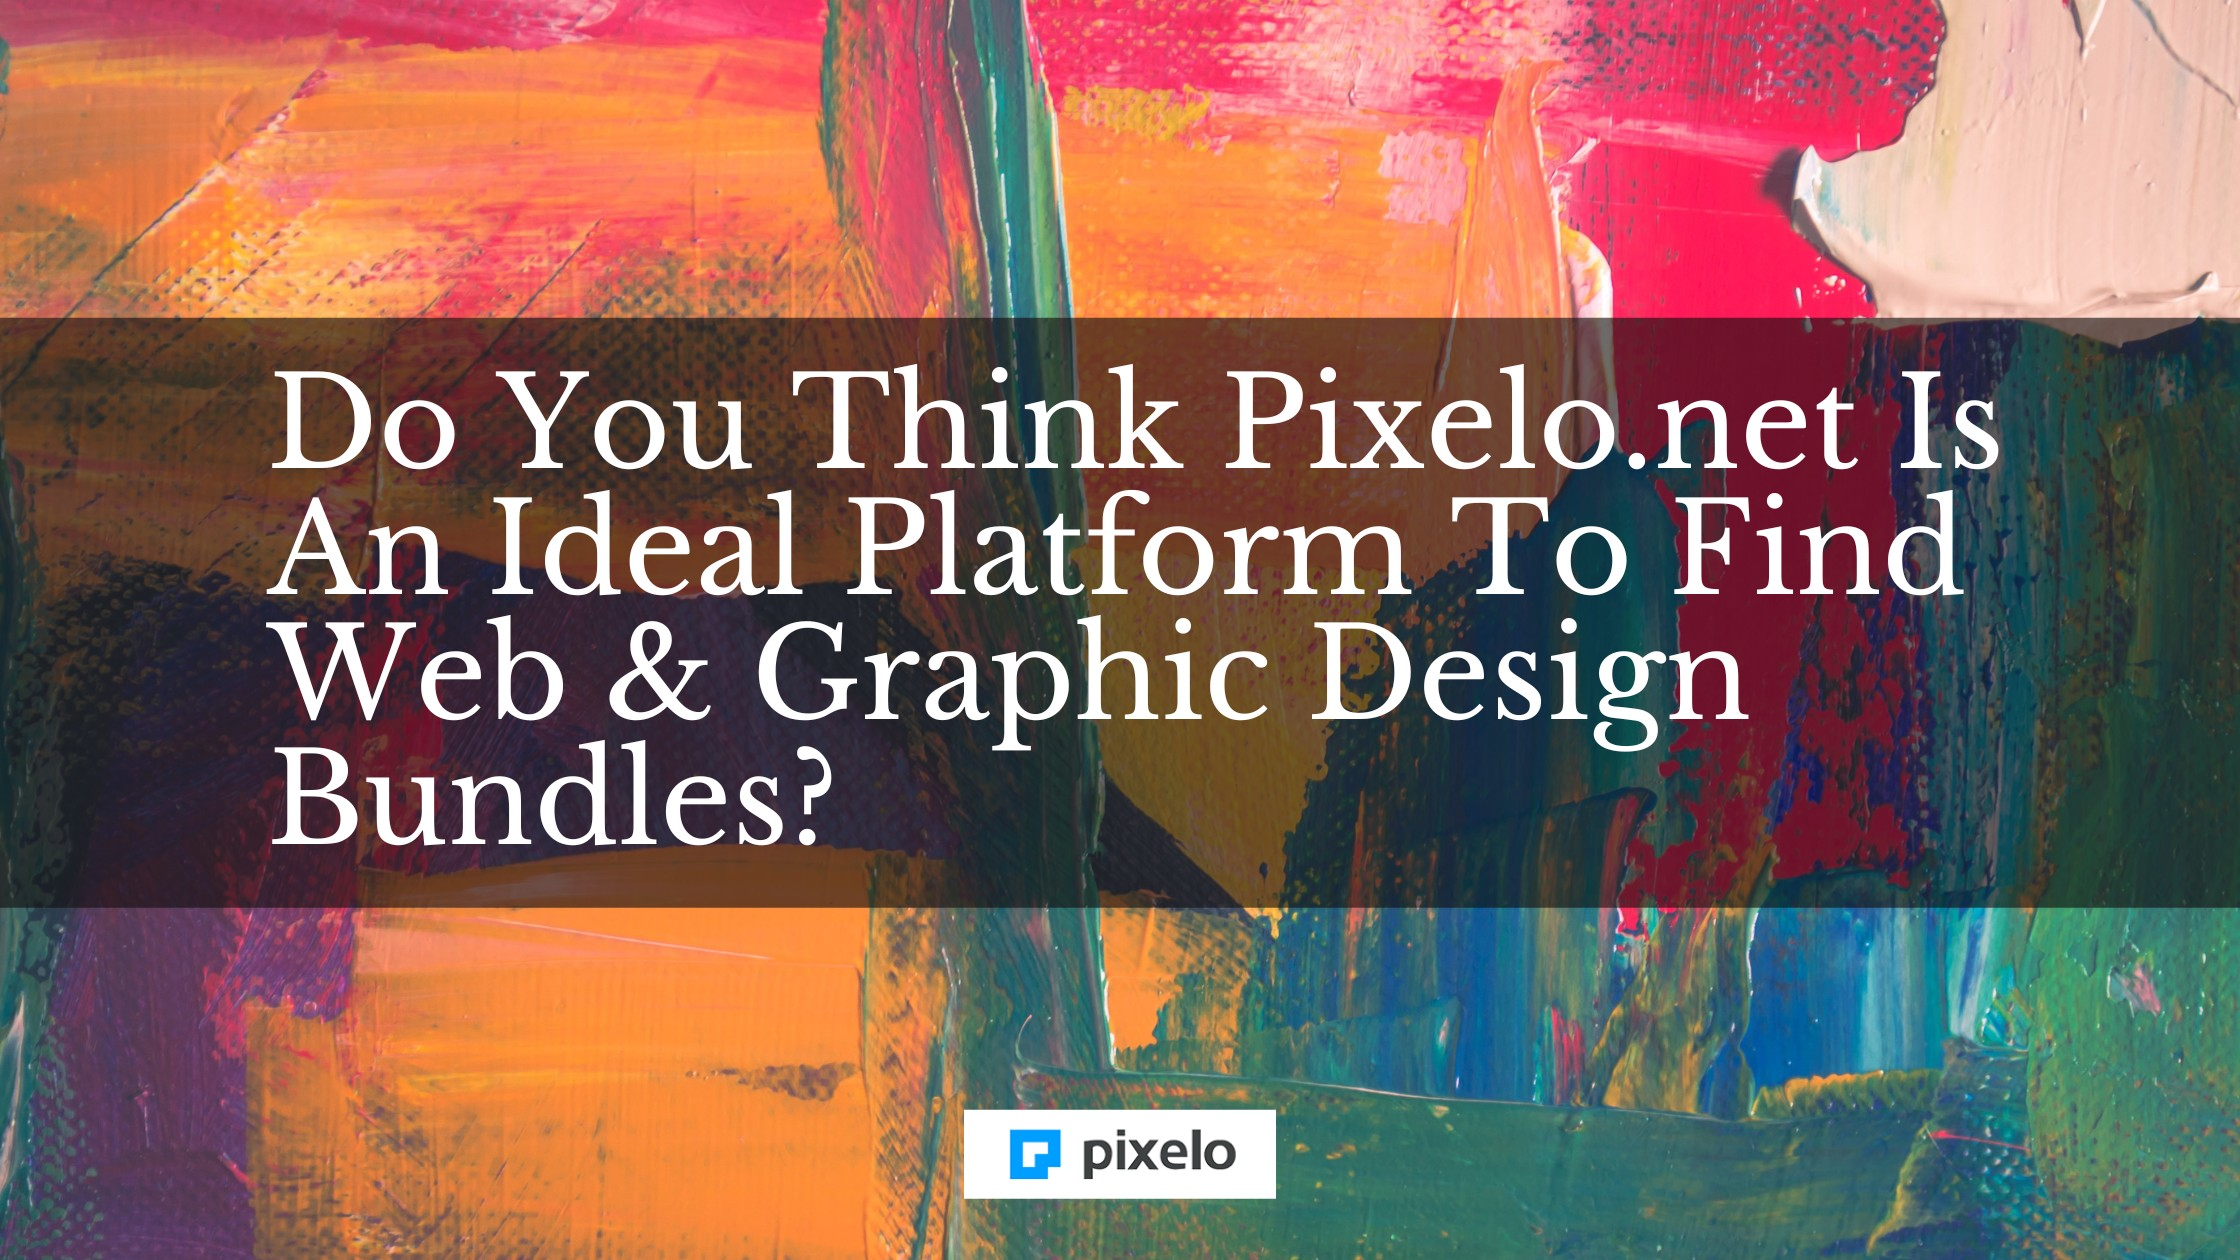 Do you think Pixelo.net is an ideal platform to find web & graphic design bundles?